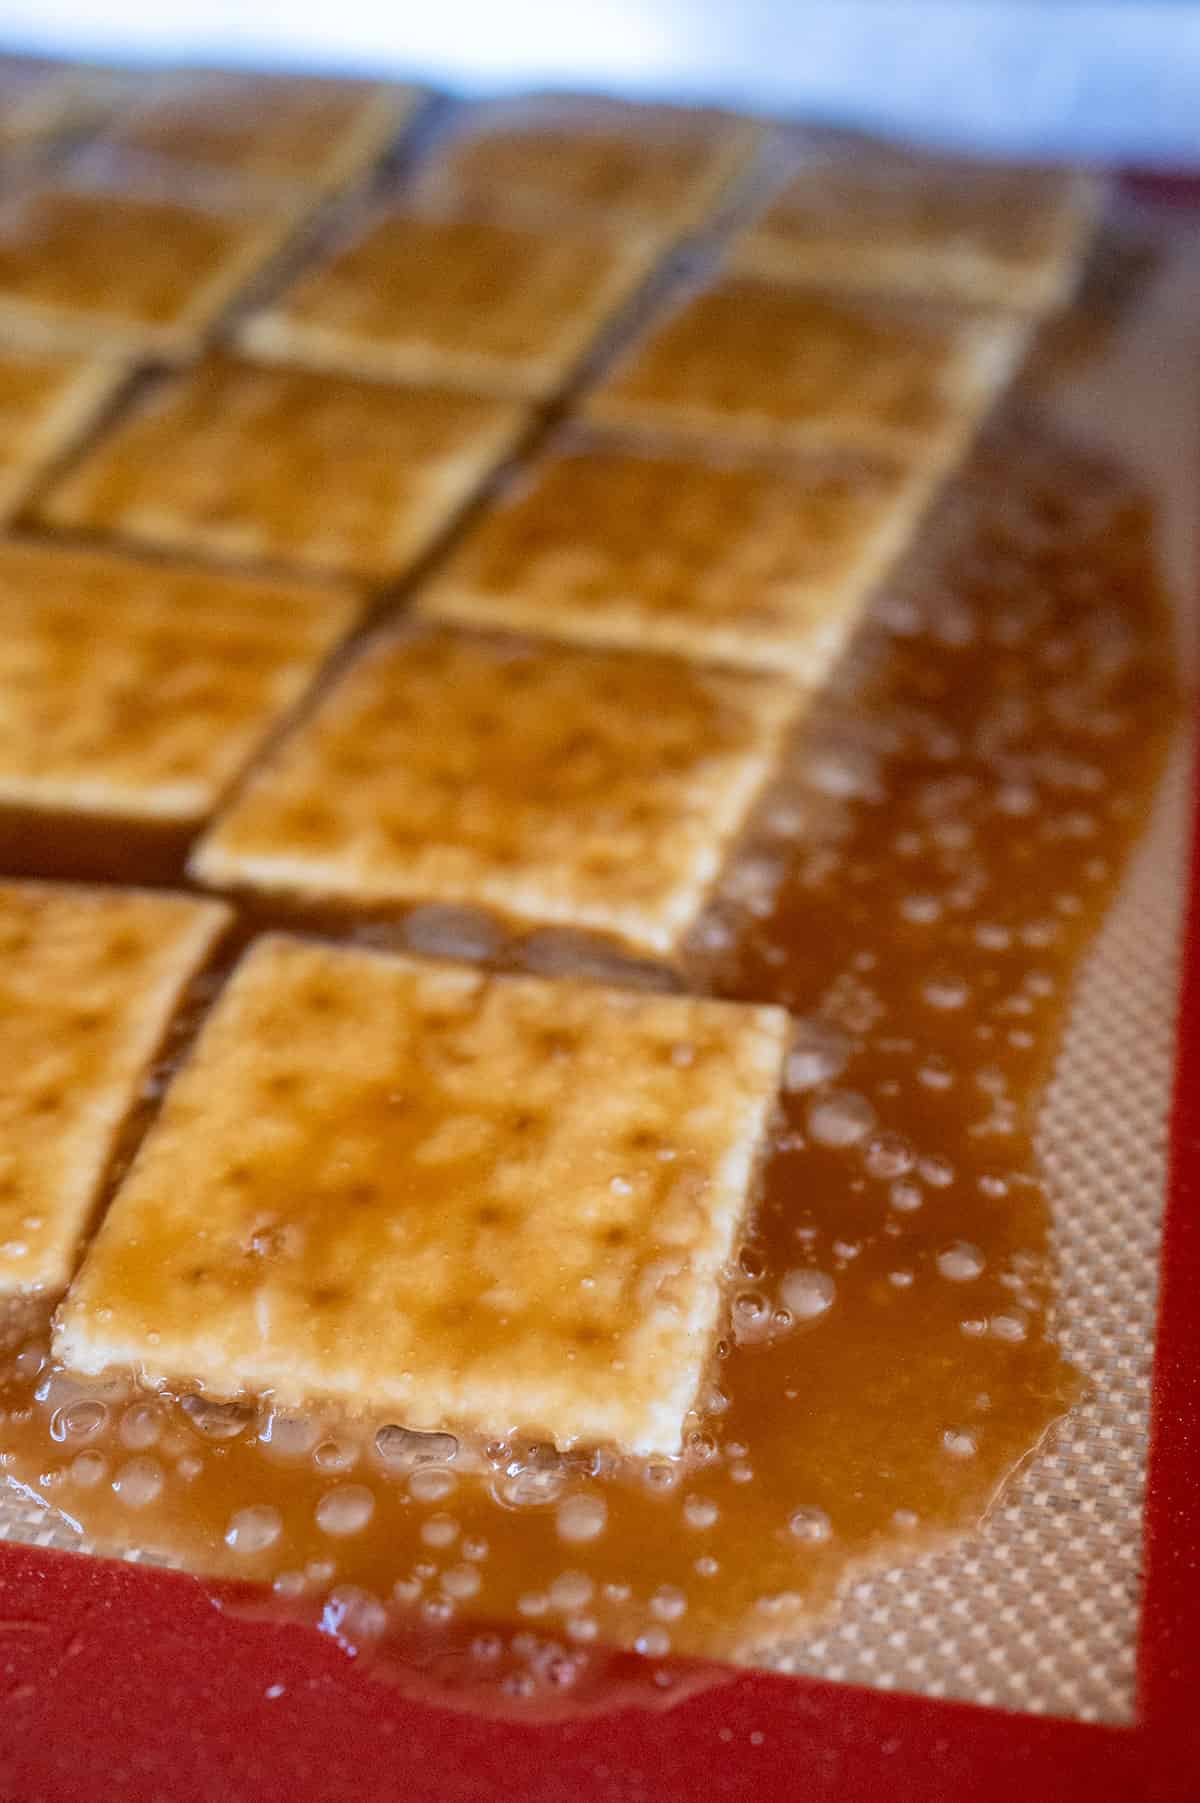 Toffee bubbling up.